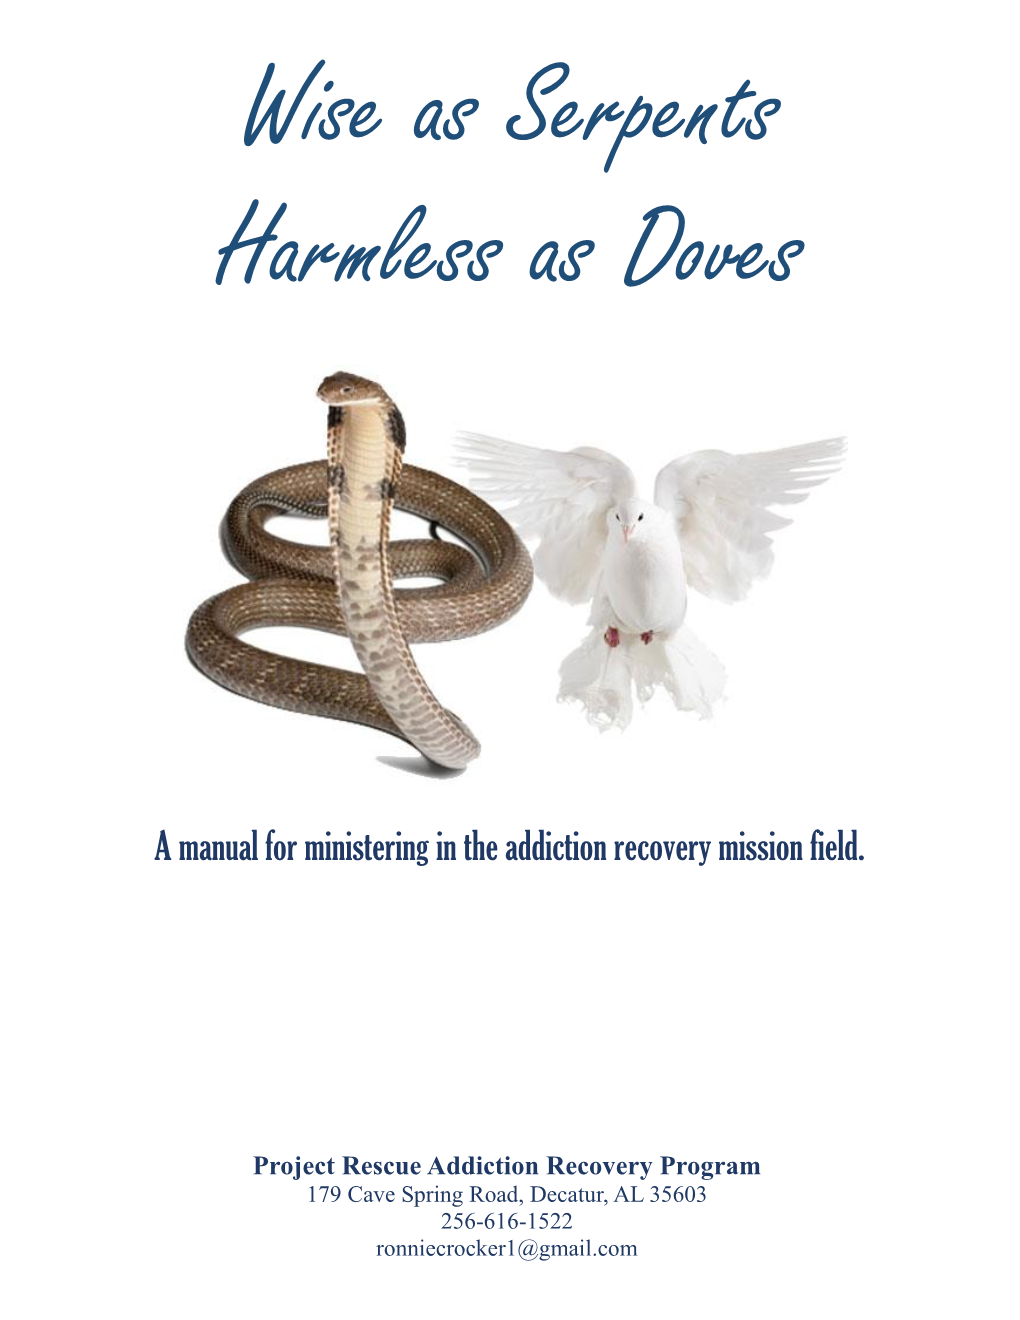 A Manual for Ministering in the Addiction Recovery Mission Field